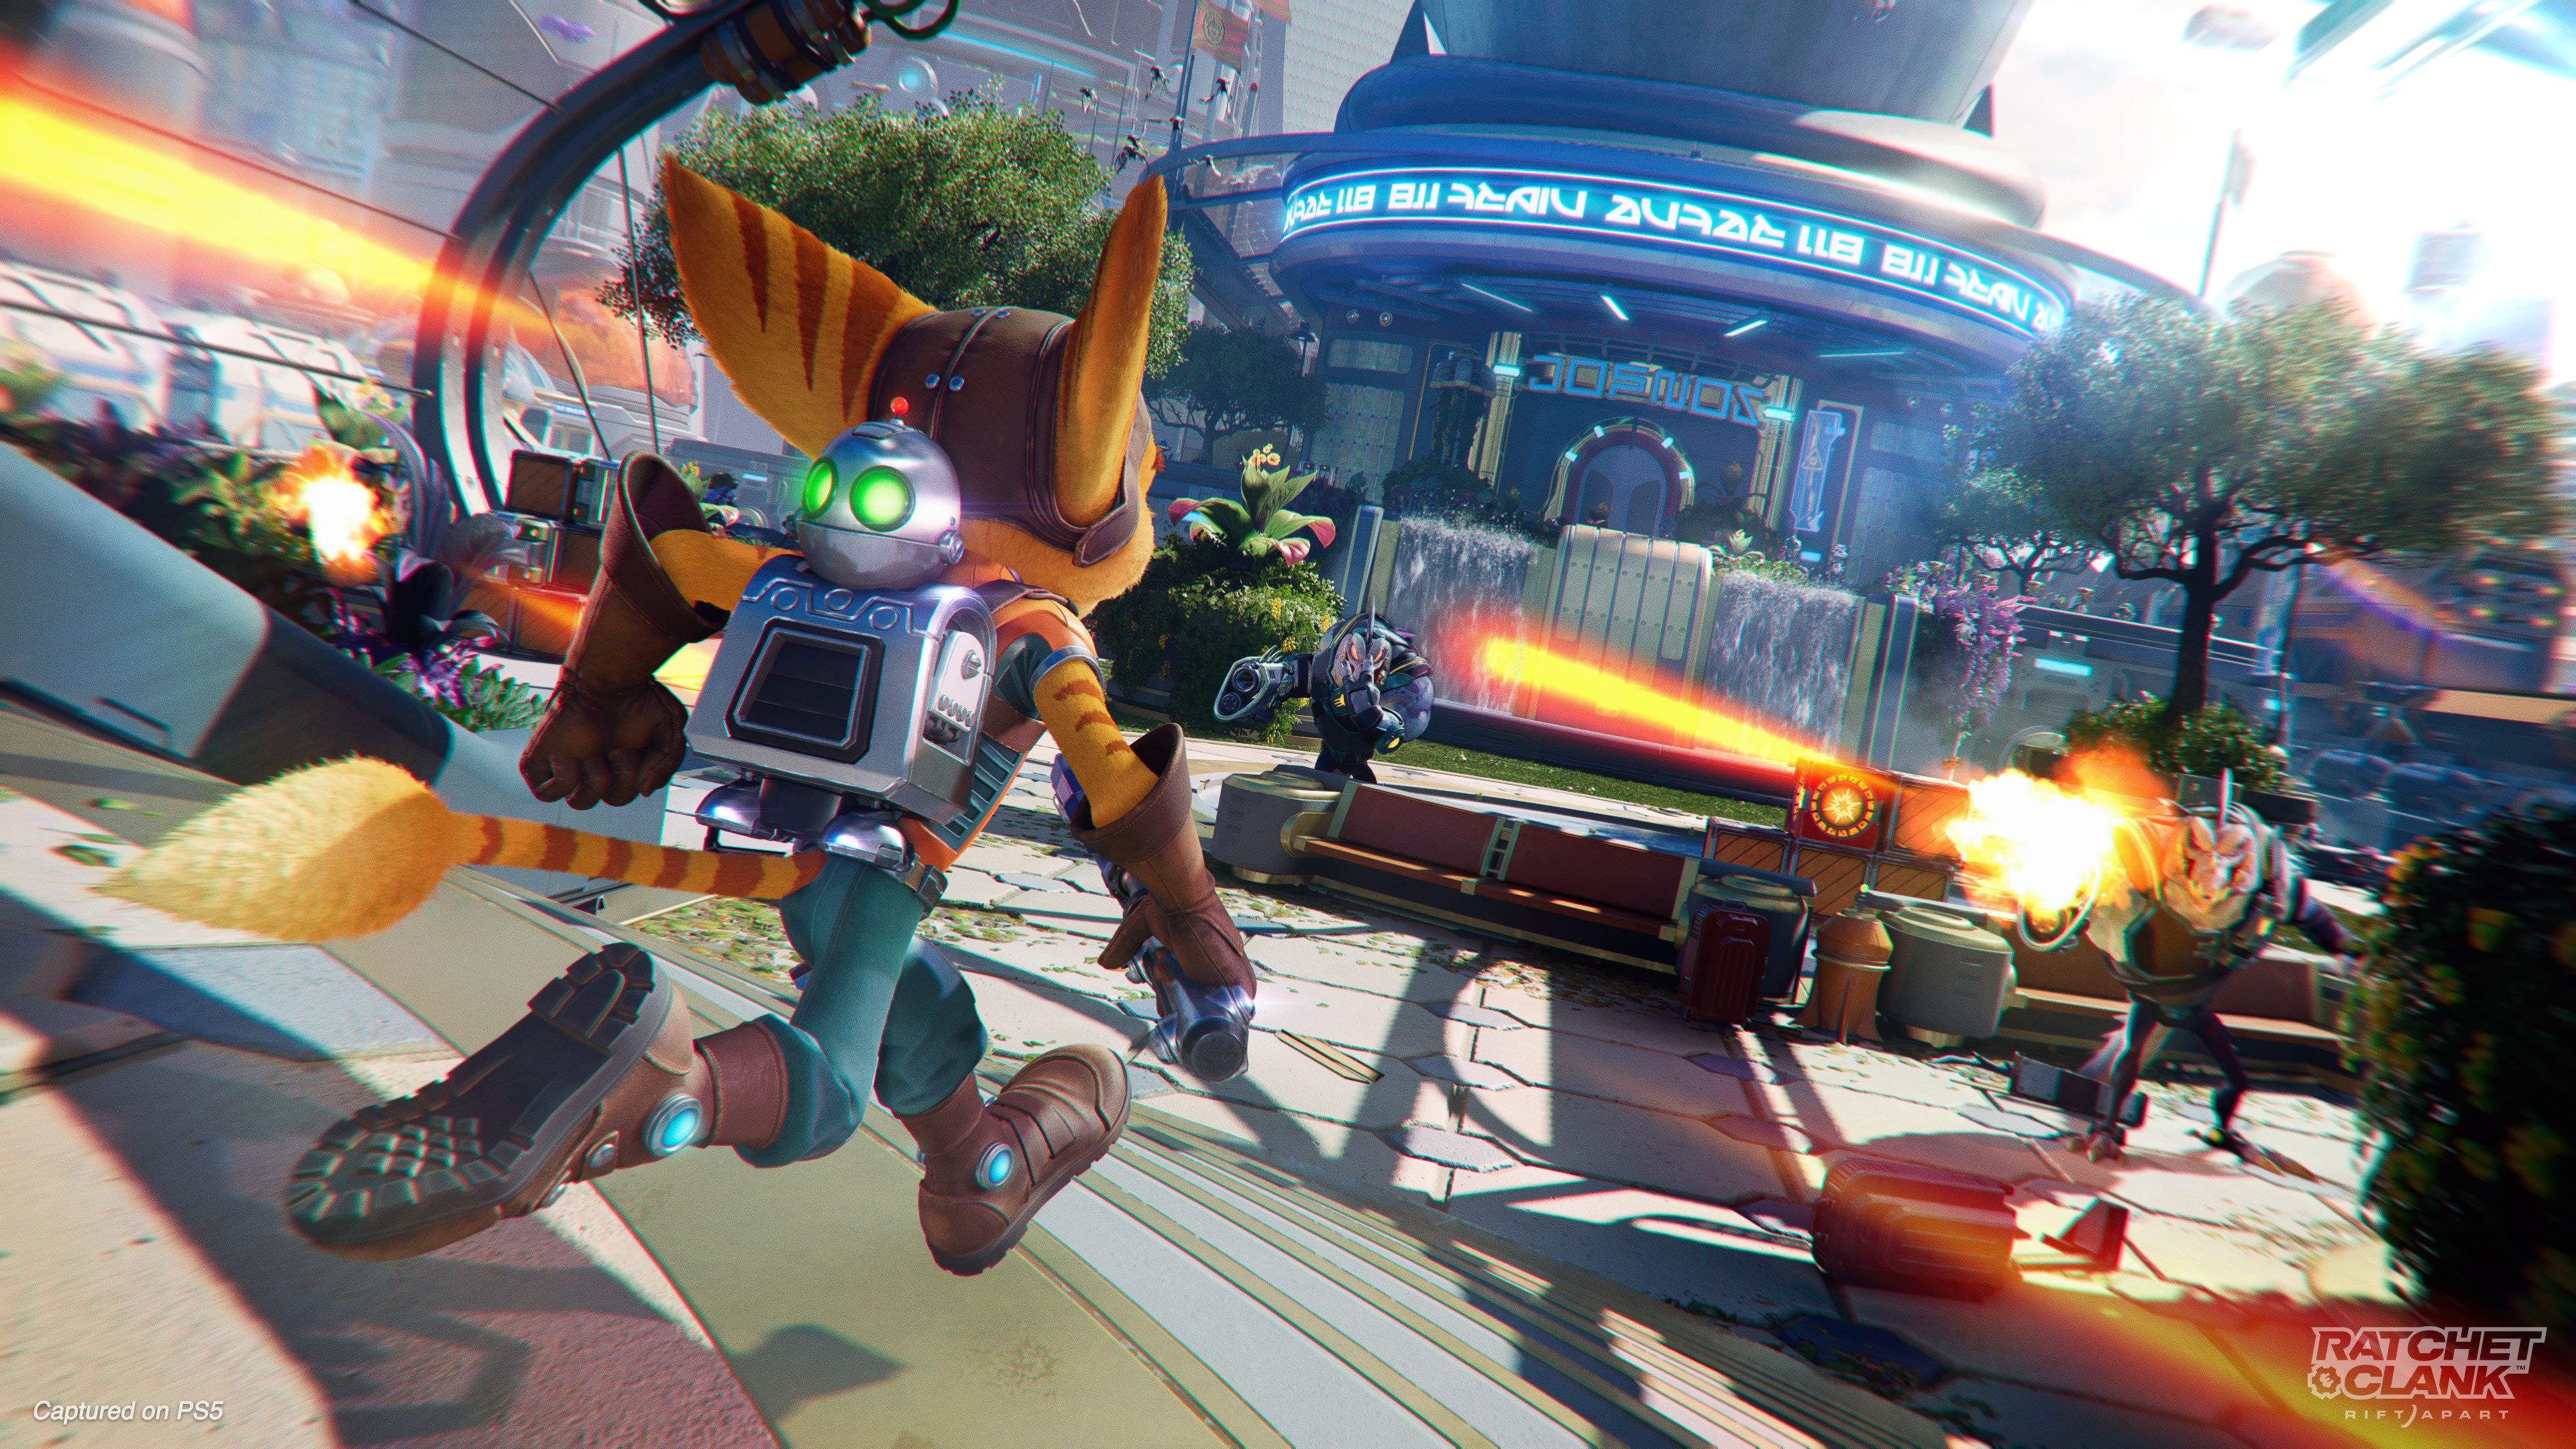 Video Game Ratchet & Clank: Rift Apart HD Wallpaper | Background Image